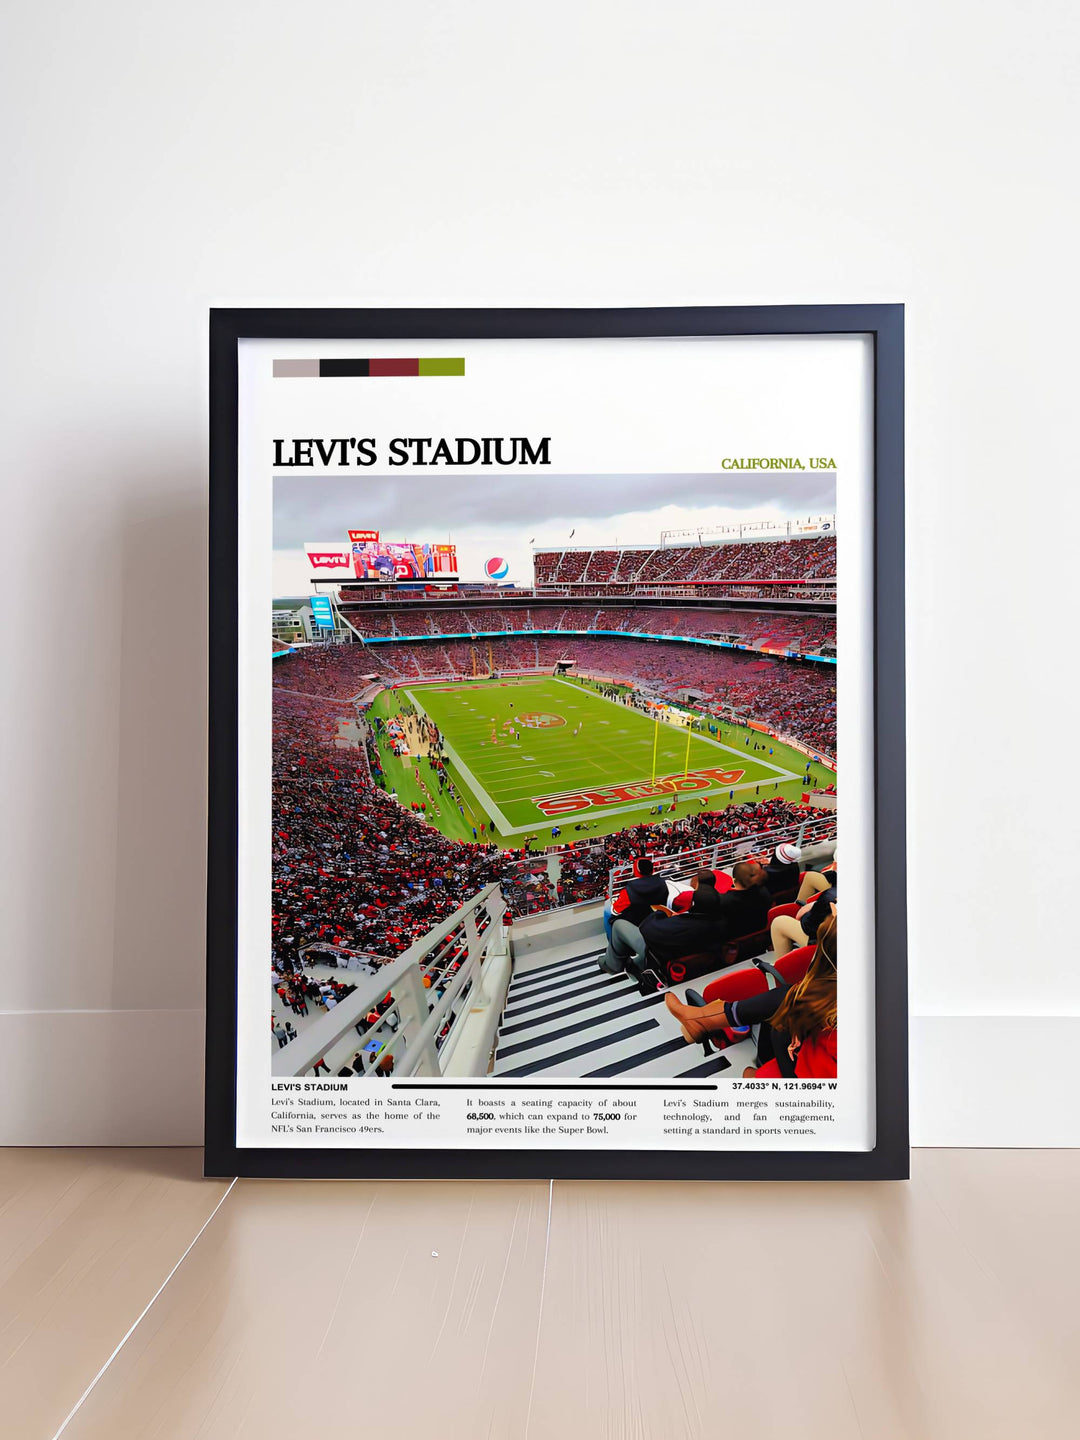  Artistic representation of Levi Stadium with a lively crowd, a must-have for San Francisco 49ers fans and collectors of sports memorabilia, illustrating the thrilling atmosphere of a football game.